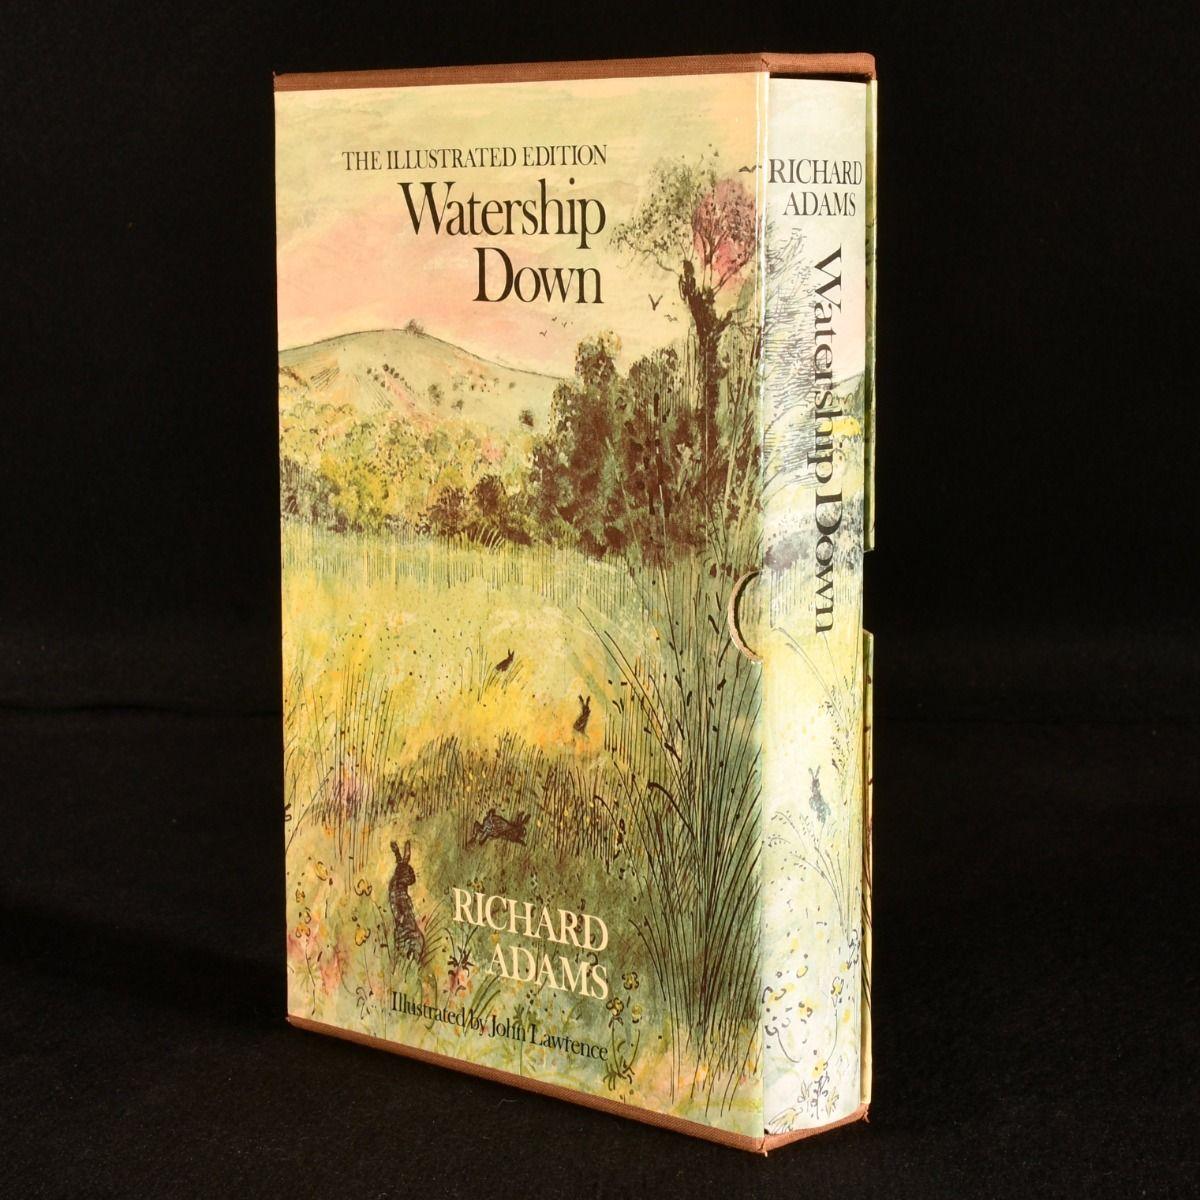 A signed presentation copy of the beautifully produced first illustrated edition of Richard Adams's novel.

The first illustrated edition of this work, in the publisher's original quarter cloth binding, with the original unclipped dust wrapper, and